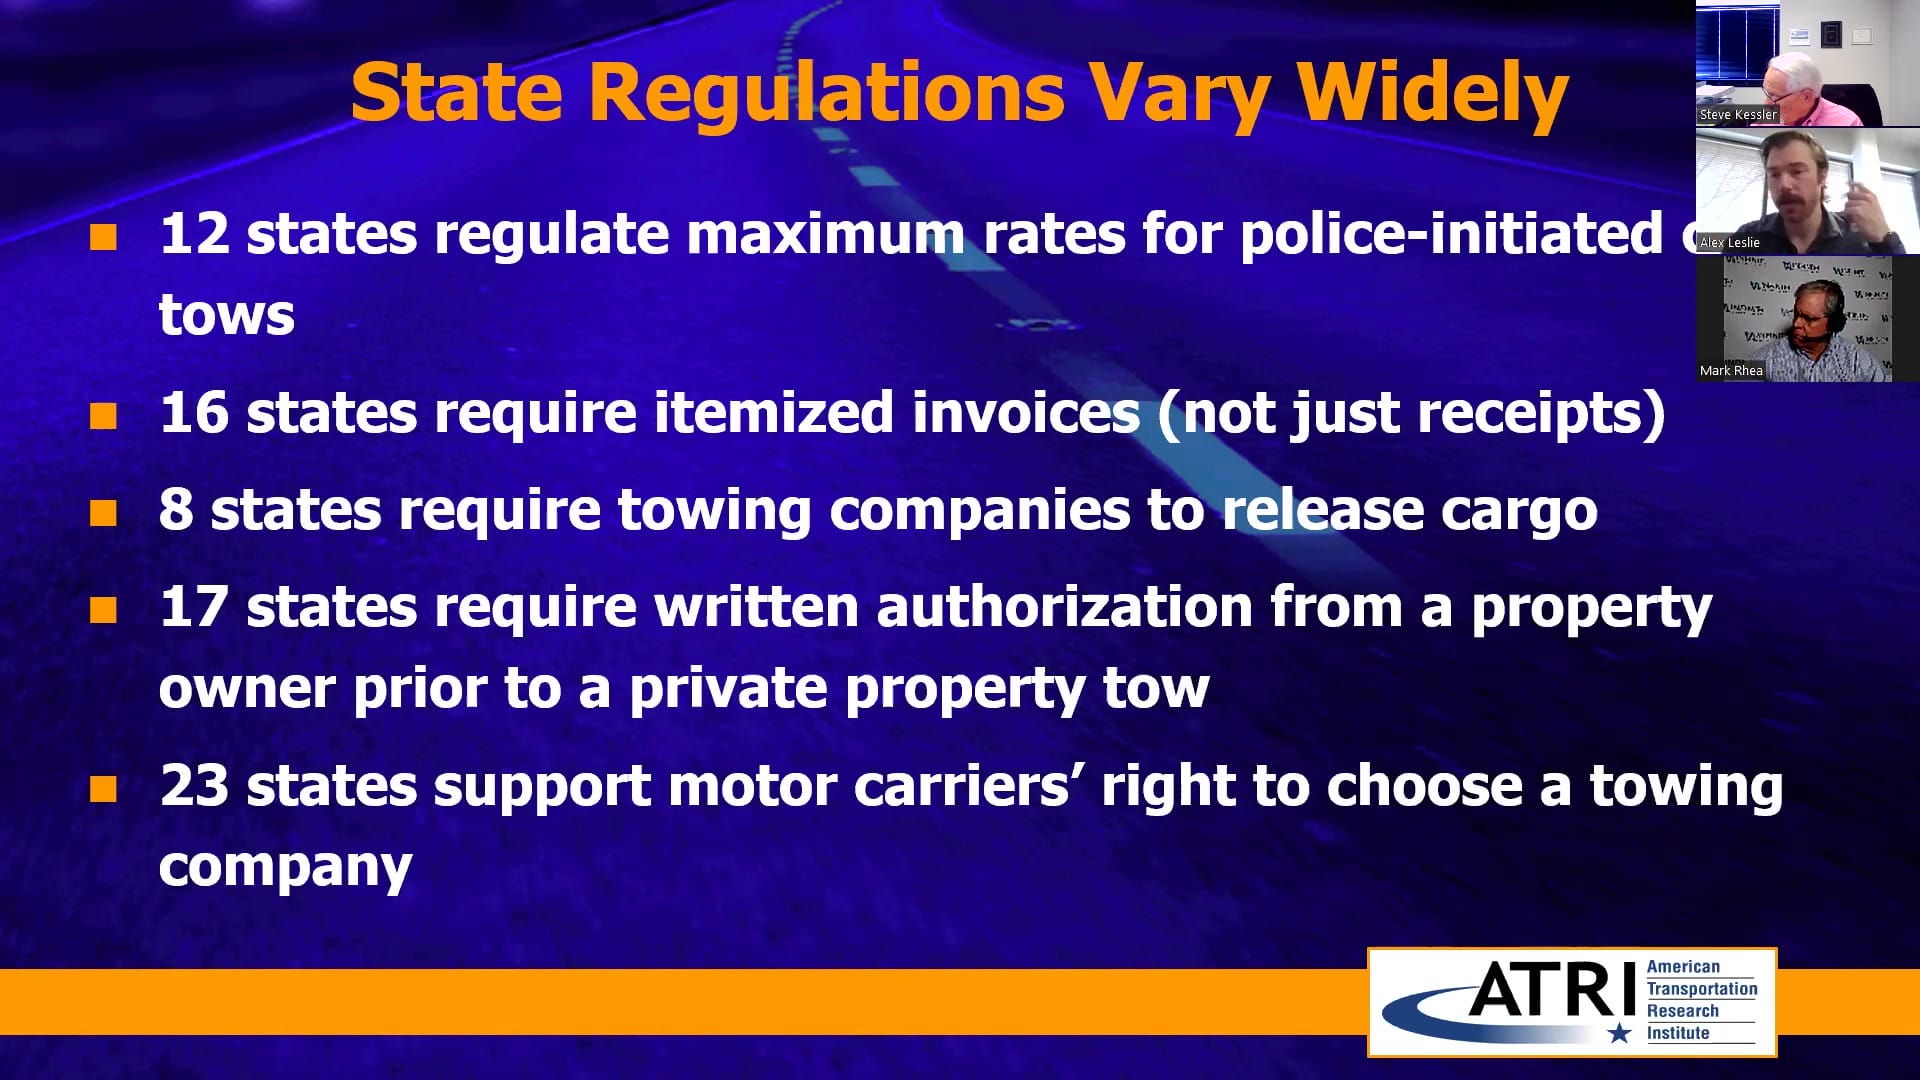 ATRI’s Research on Predatory Towing Existing State Regulations Vary Widely